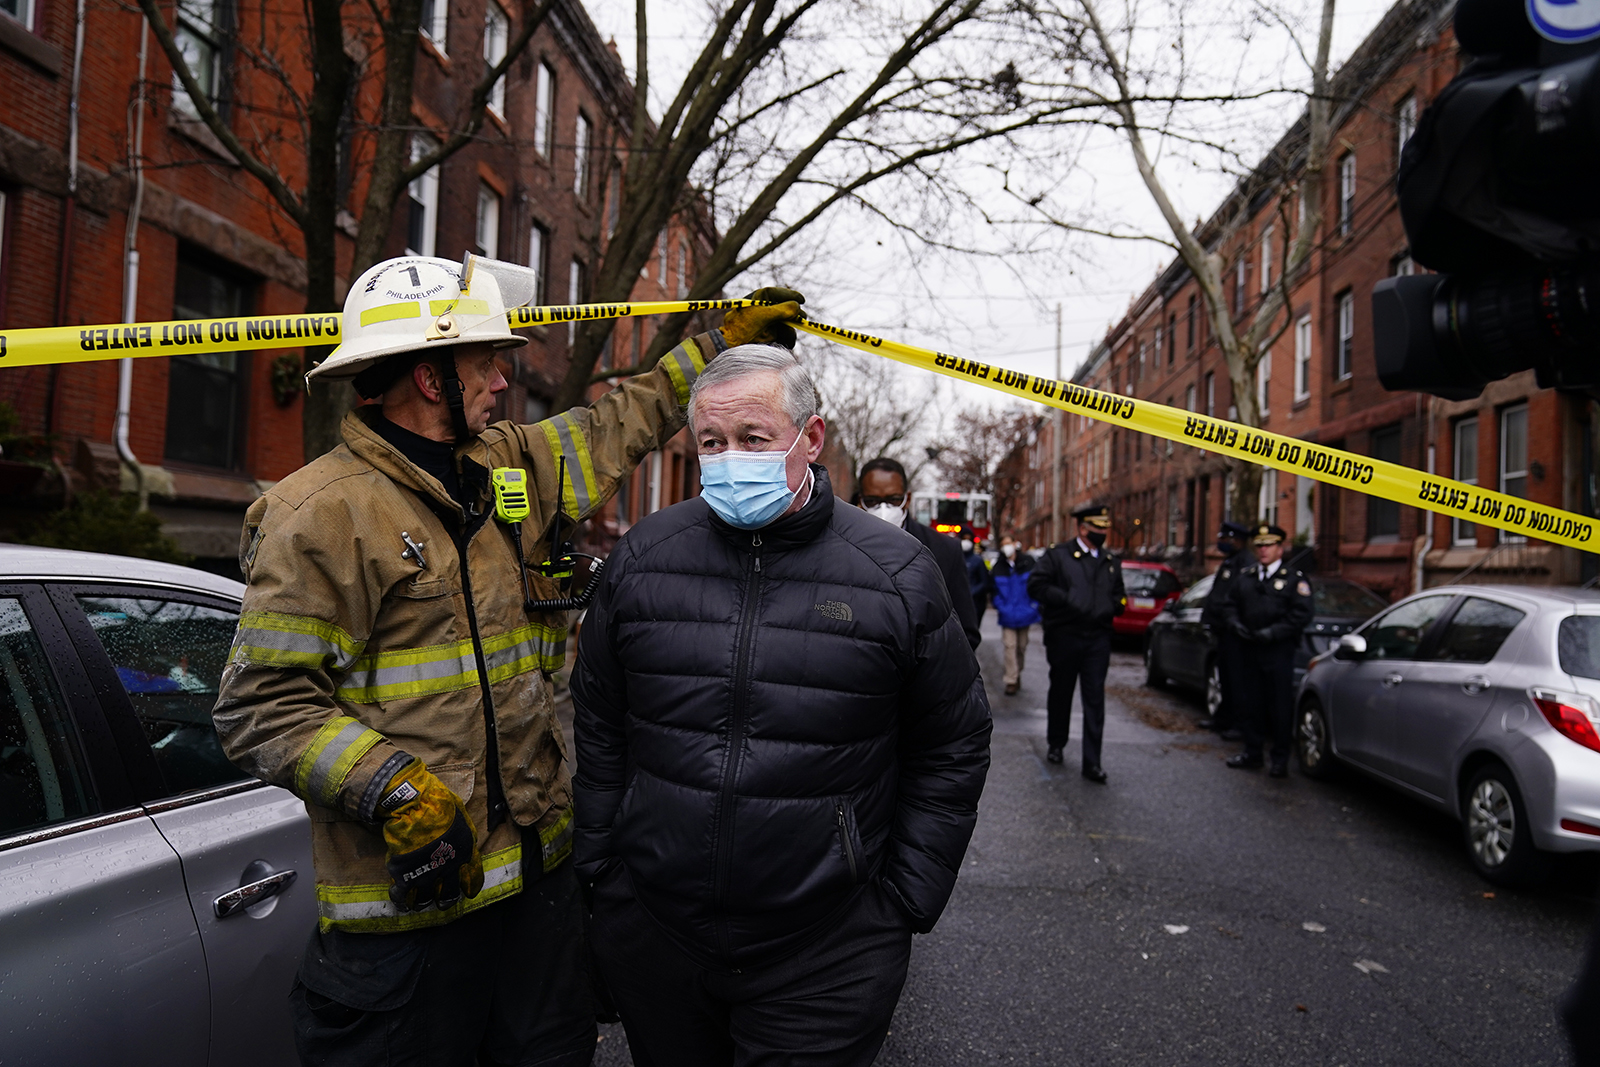 Philadelphia Mayor Jim Kenney after giving a news conference near the scene of a deadly row house fire on Wednesday.